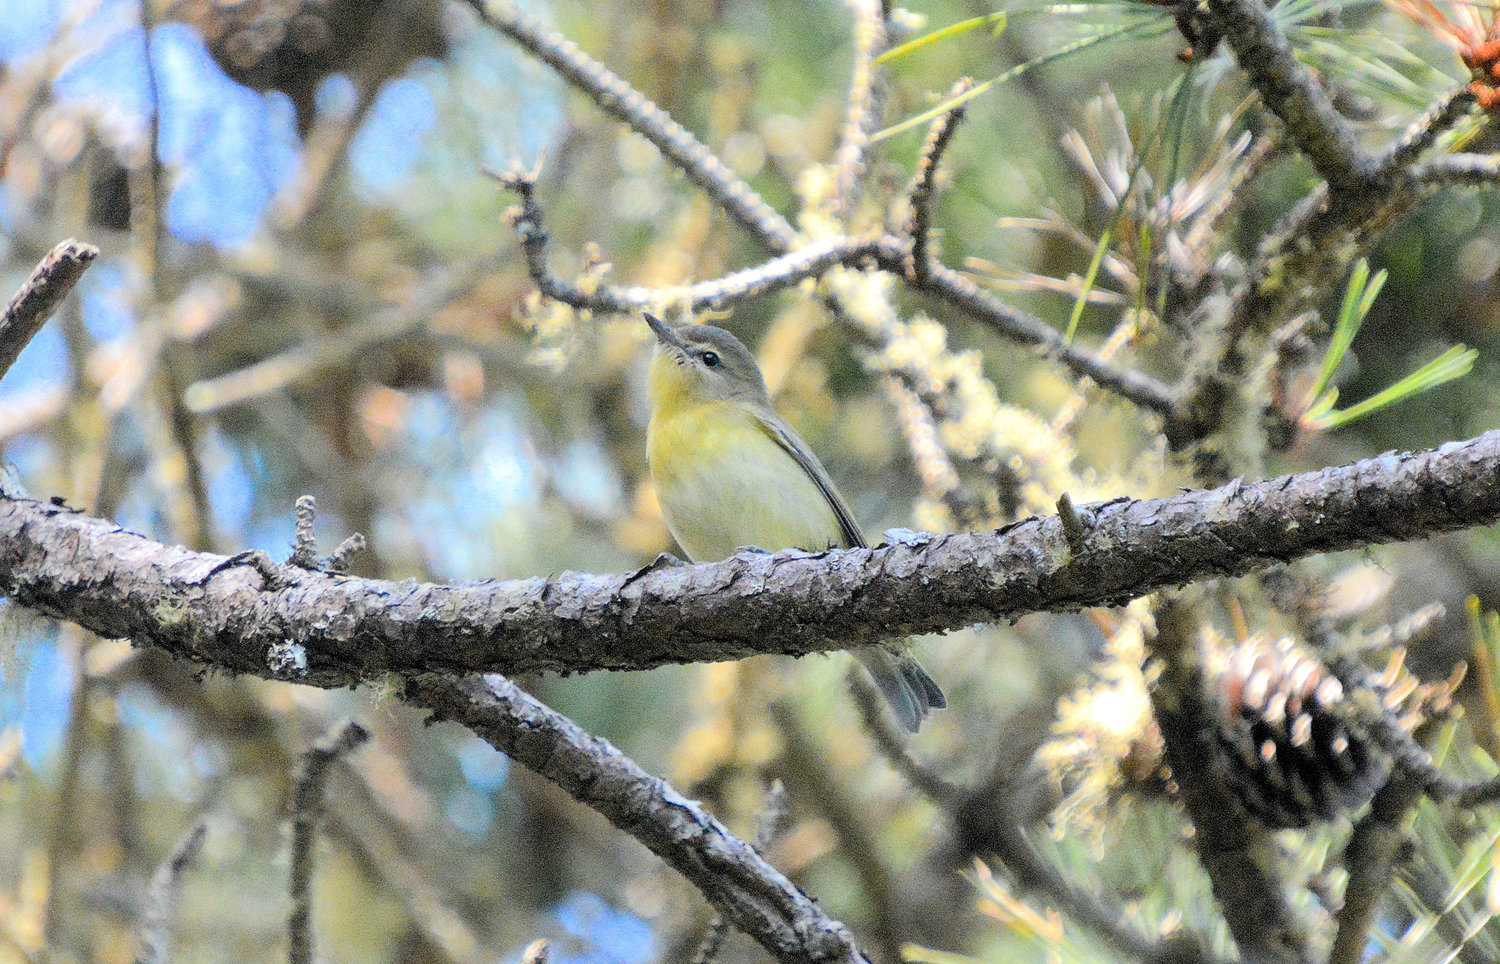 The Philadelphia Vireo is a demure bird that nests in forests from Maine to Newfoundland.